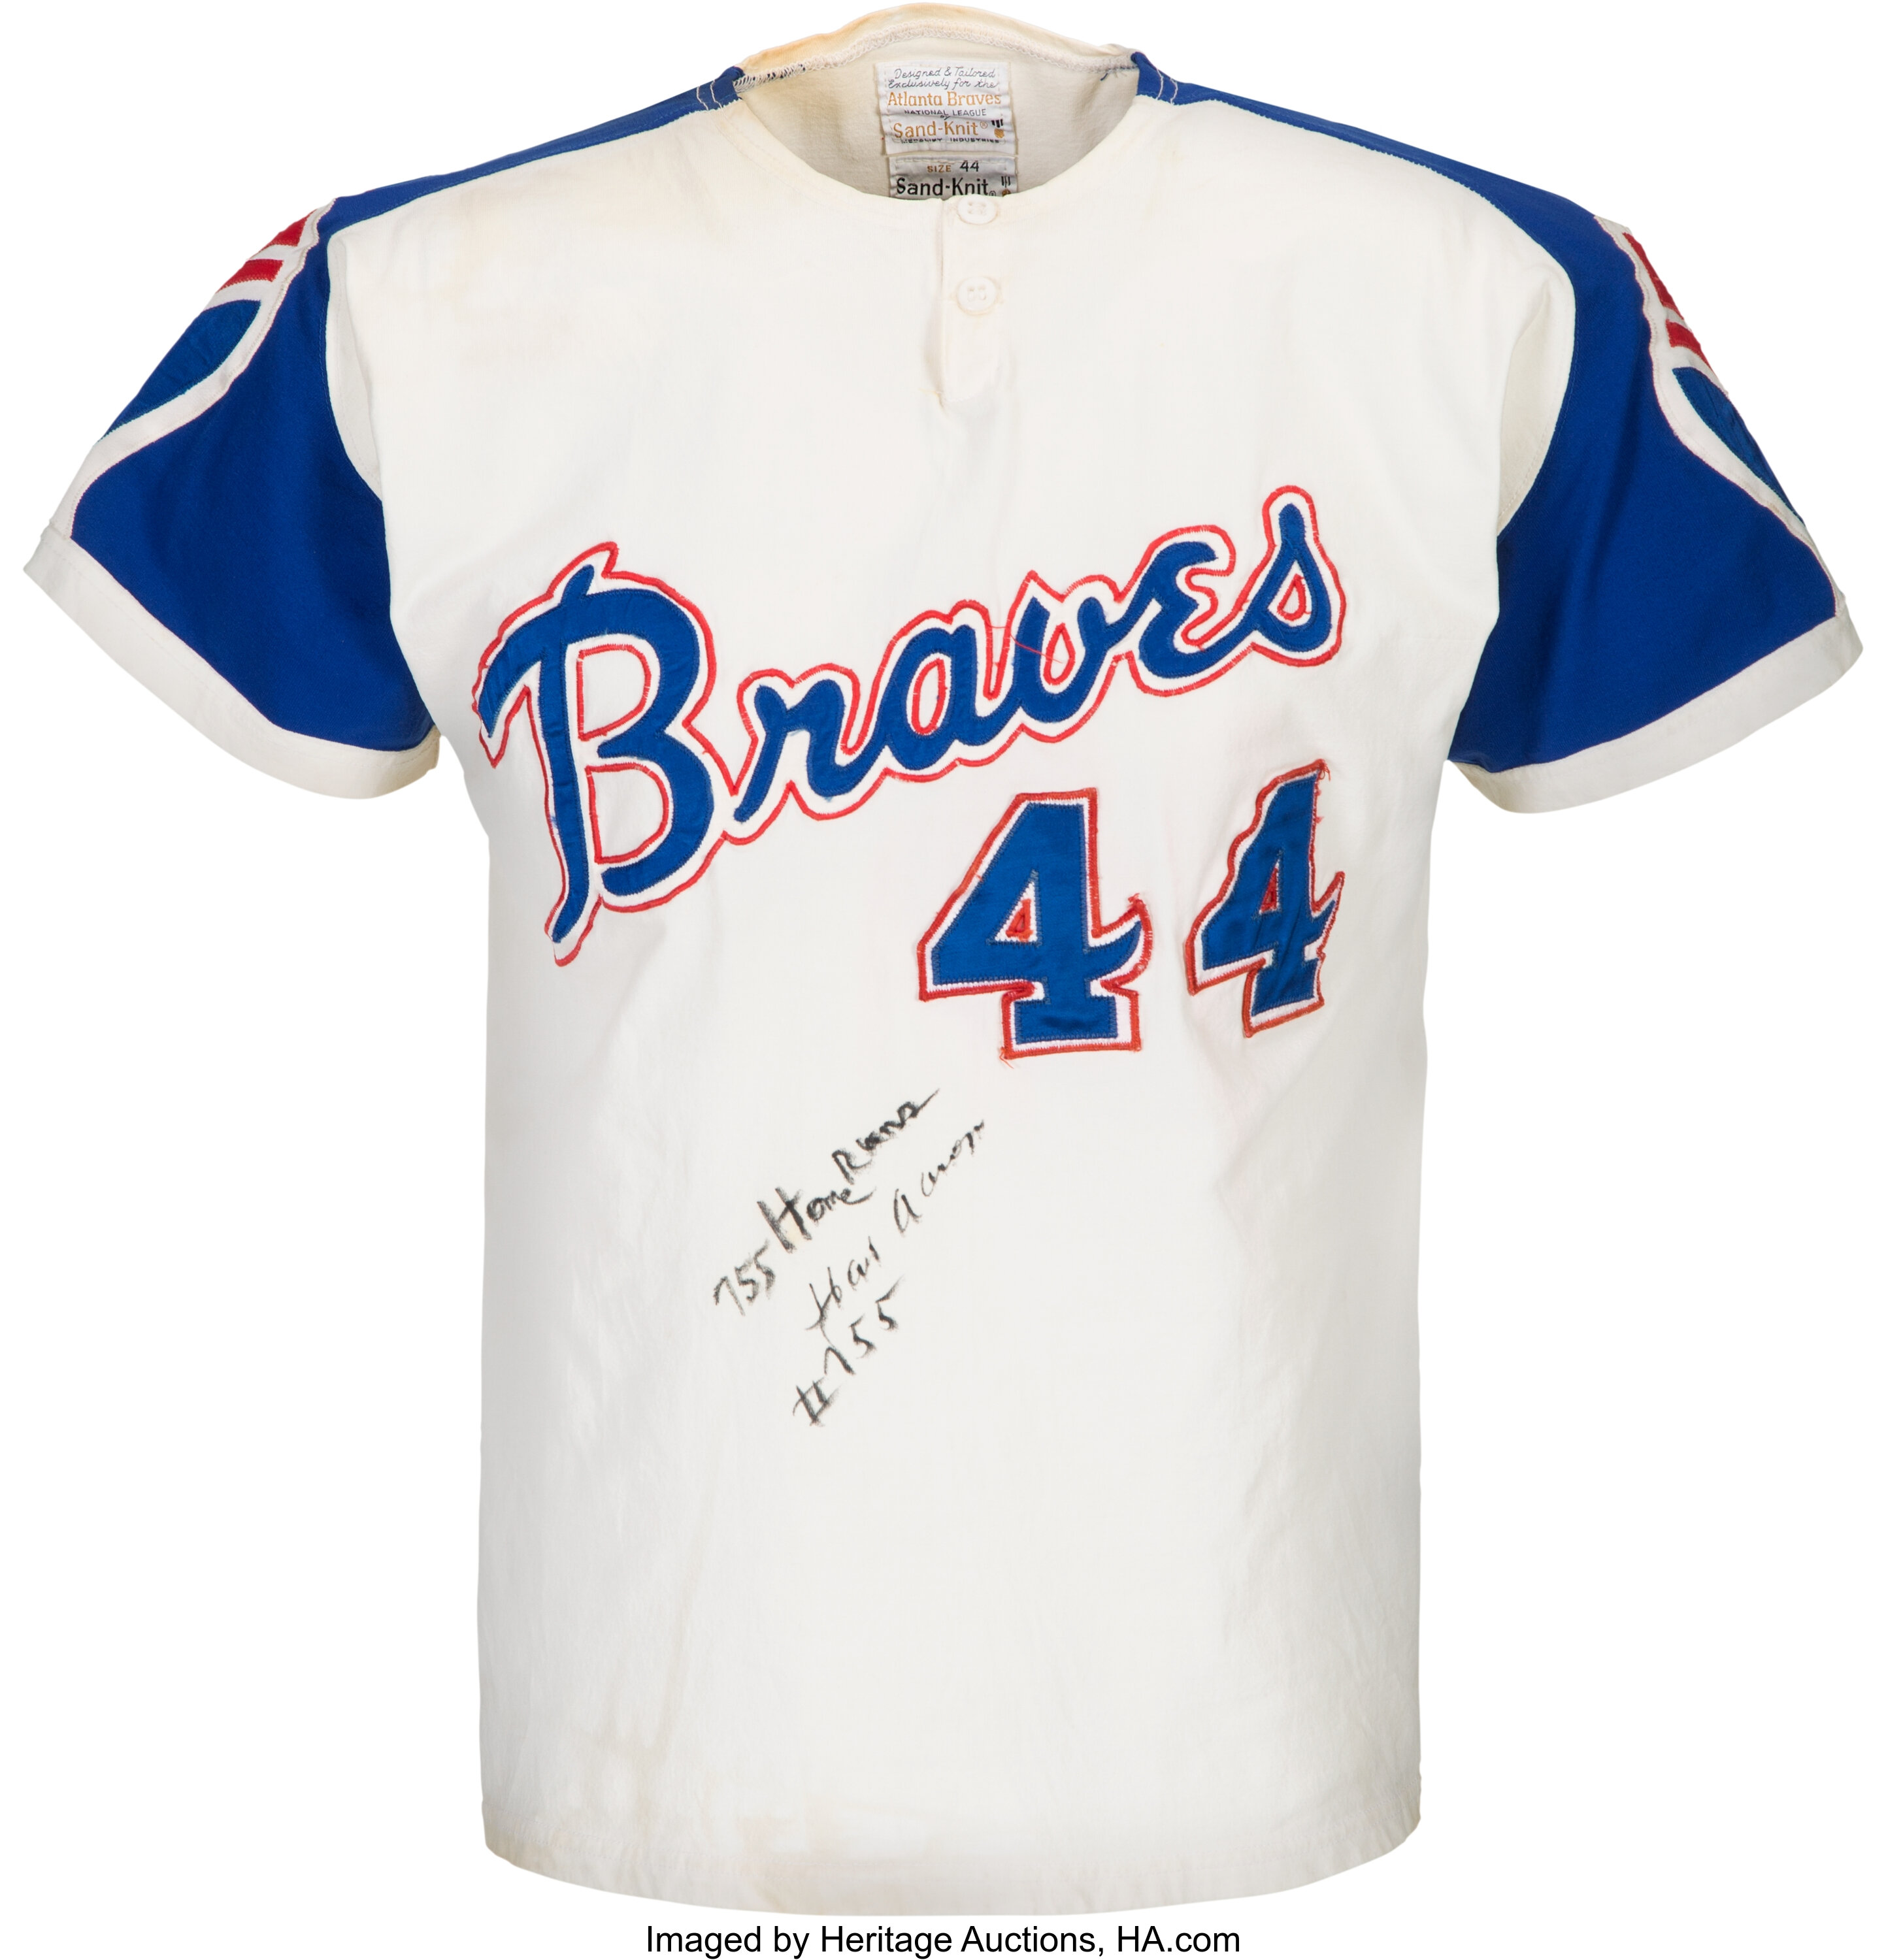 Jersey for the Atlanta Braves worn and autographed by Hank Aaron